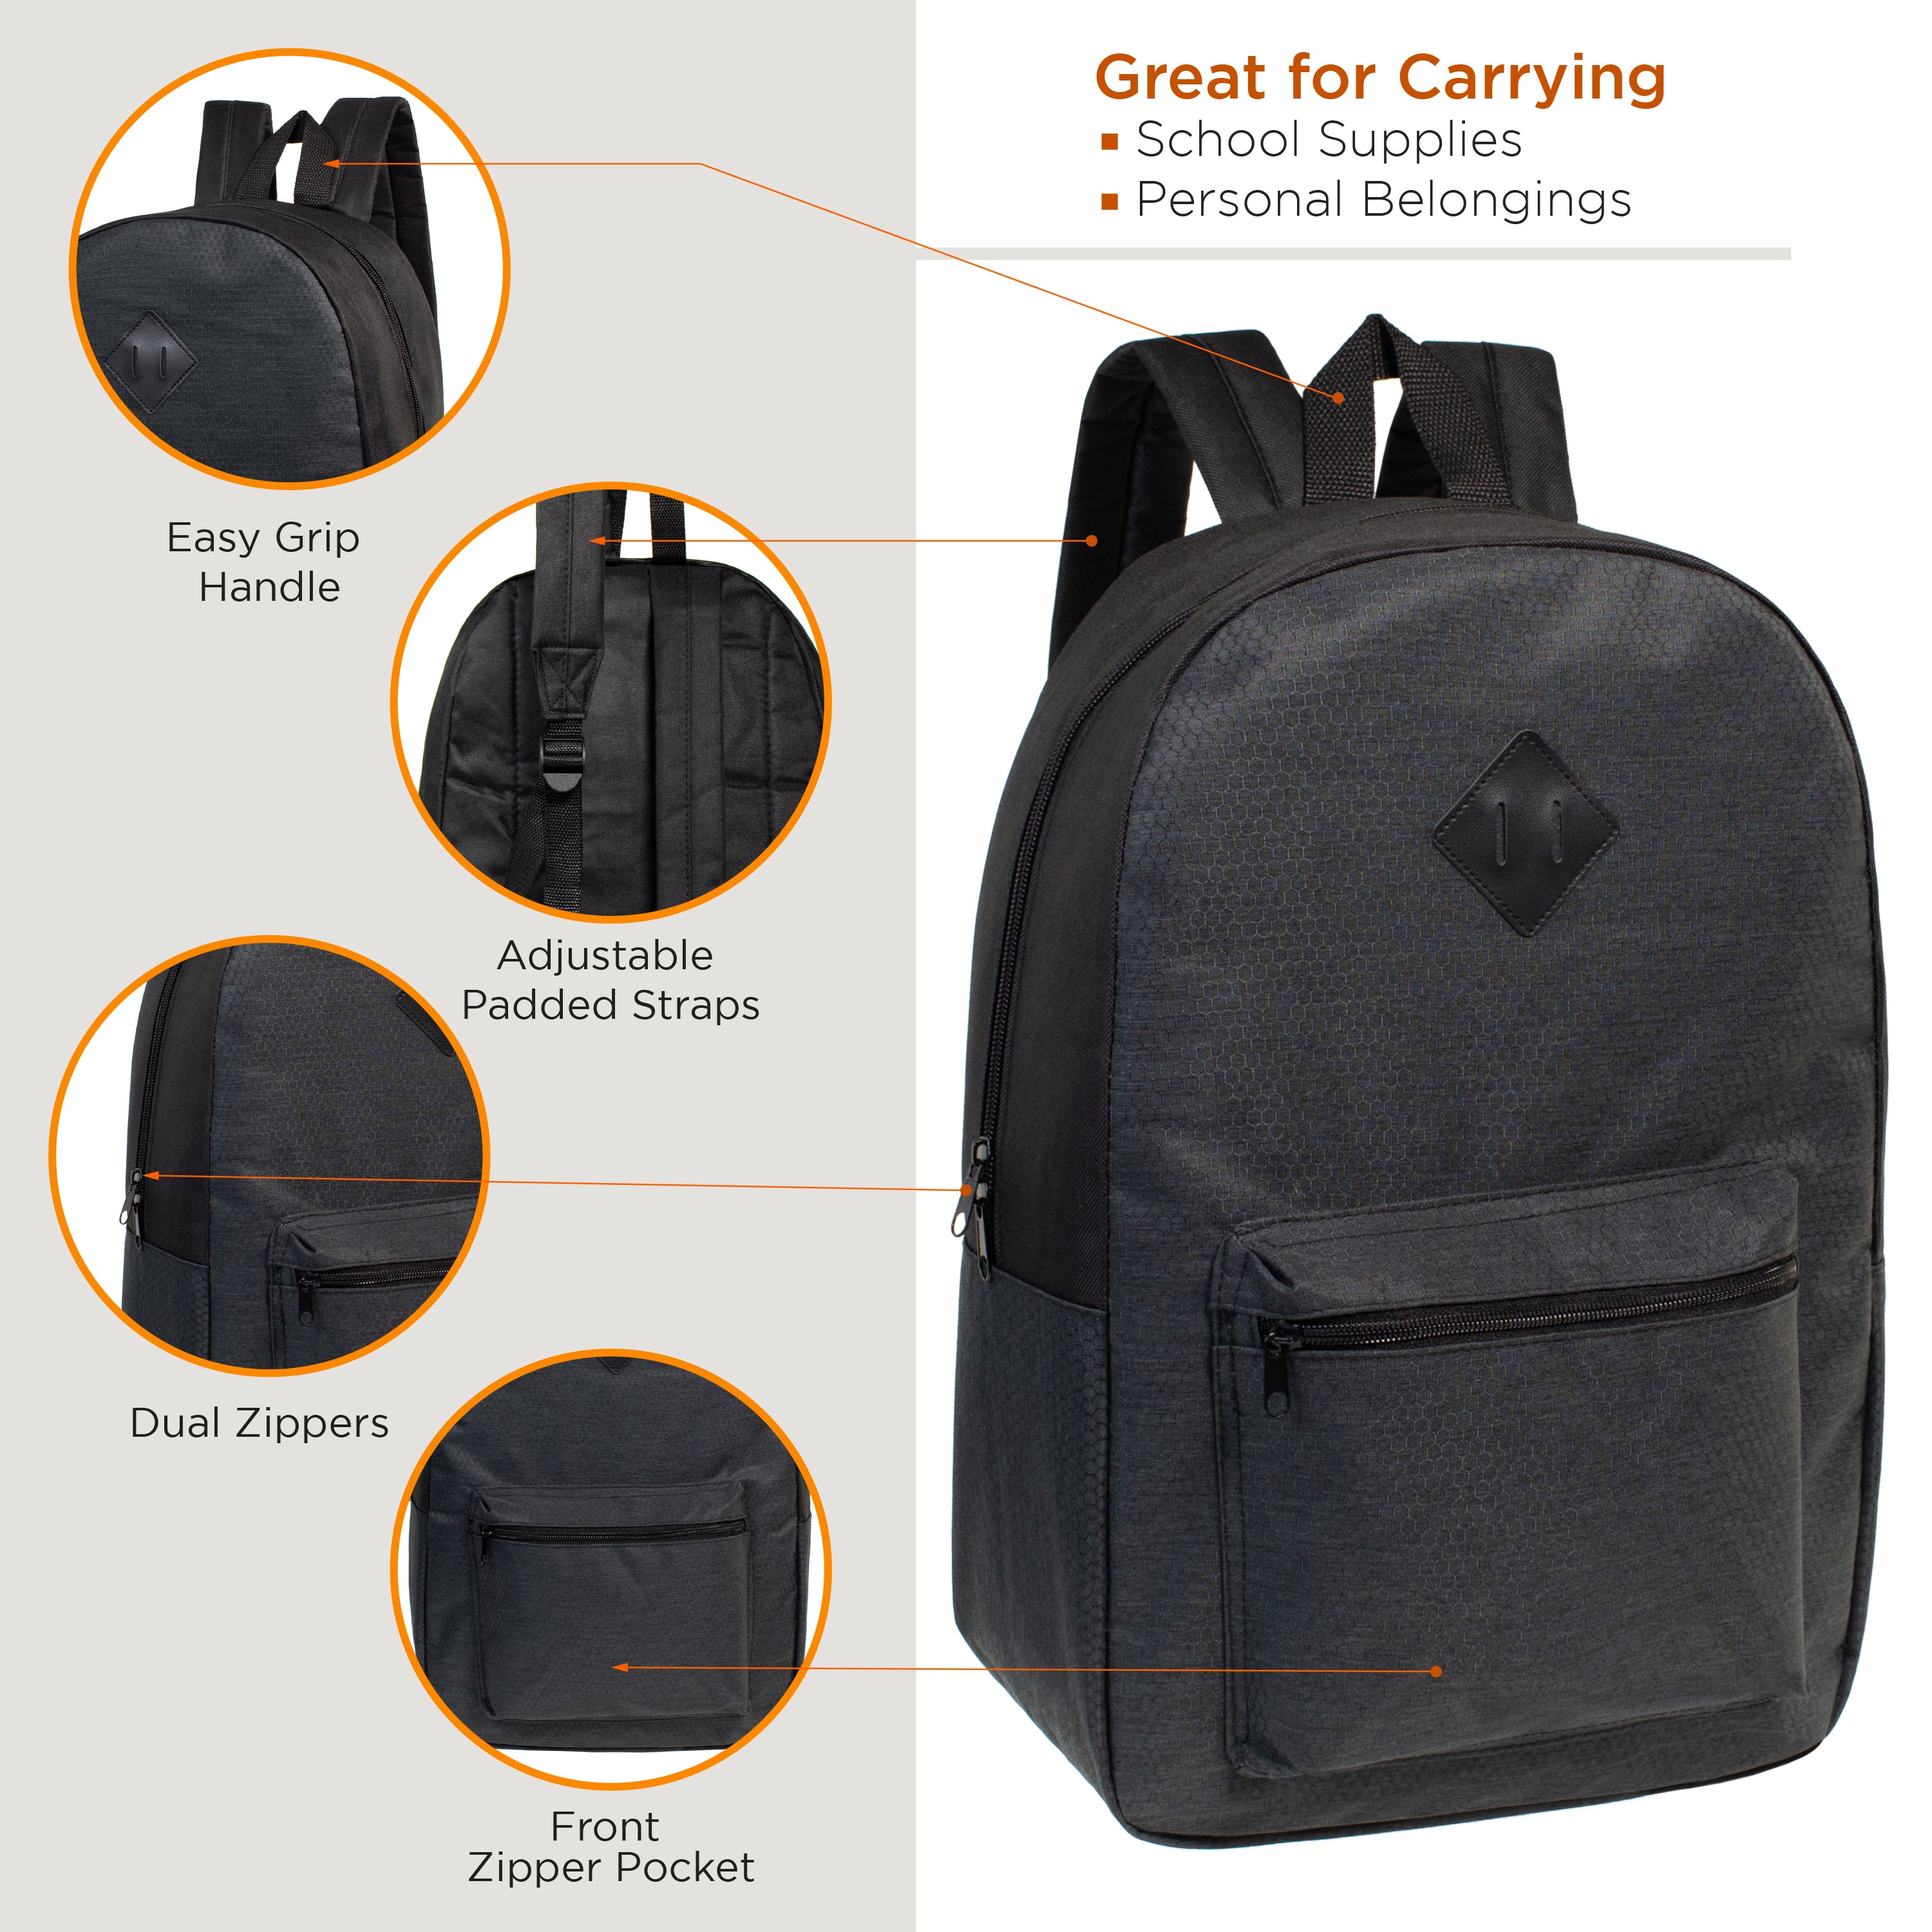 12 Wholesale Diamond Patch Backpacks in 4 Colors & 12 Bulk School Supply Kits of Your Choice